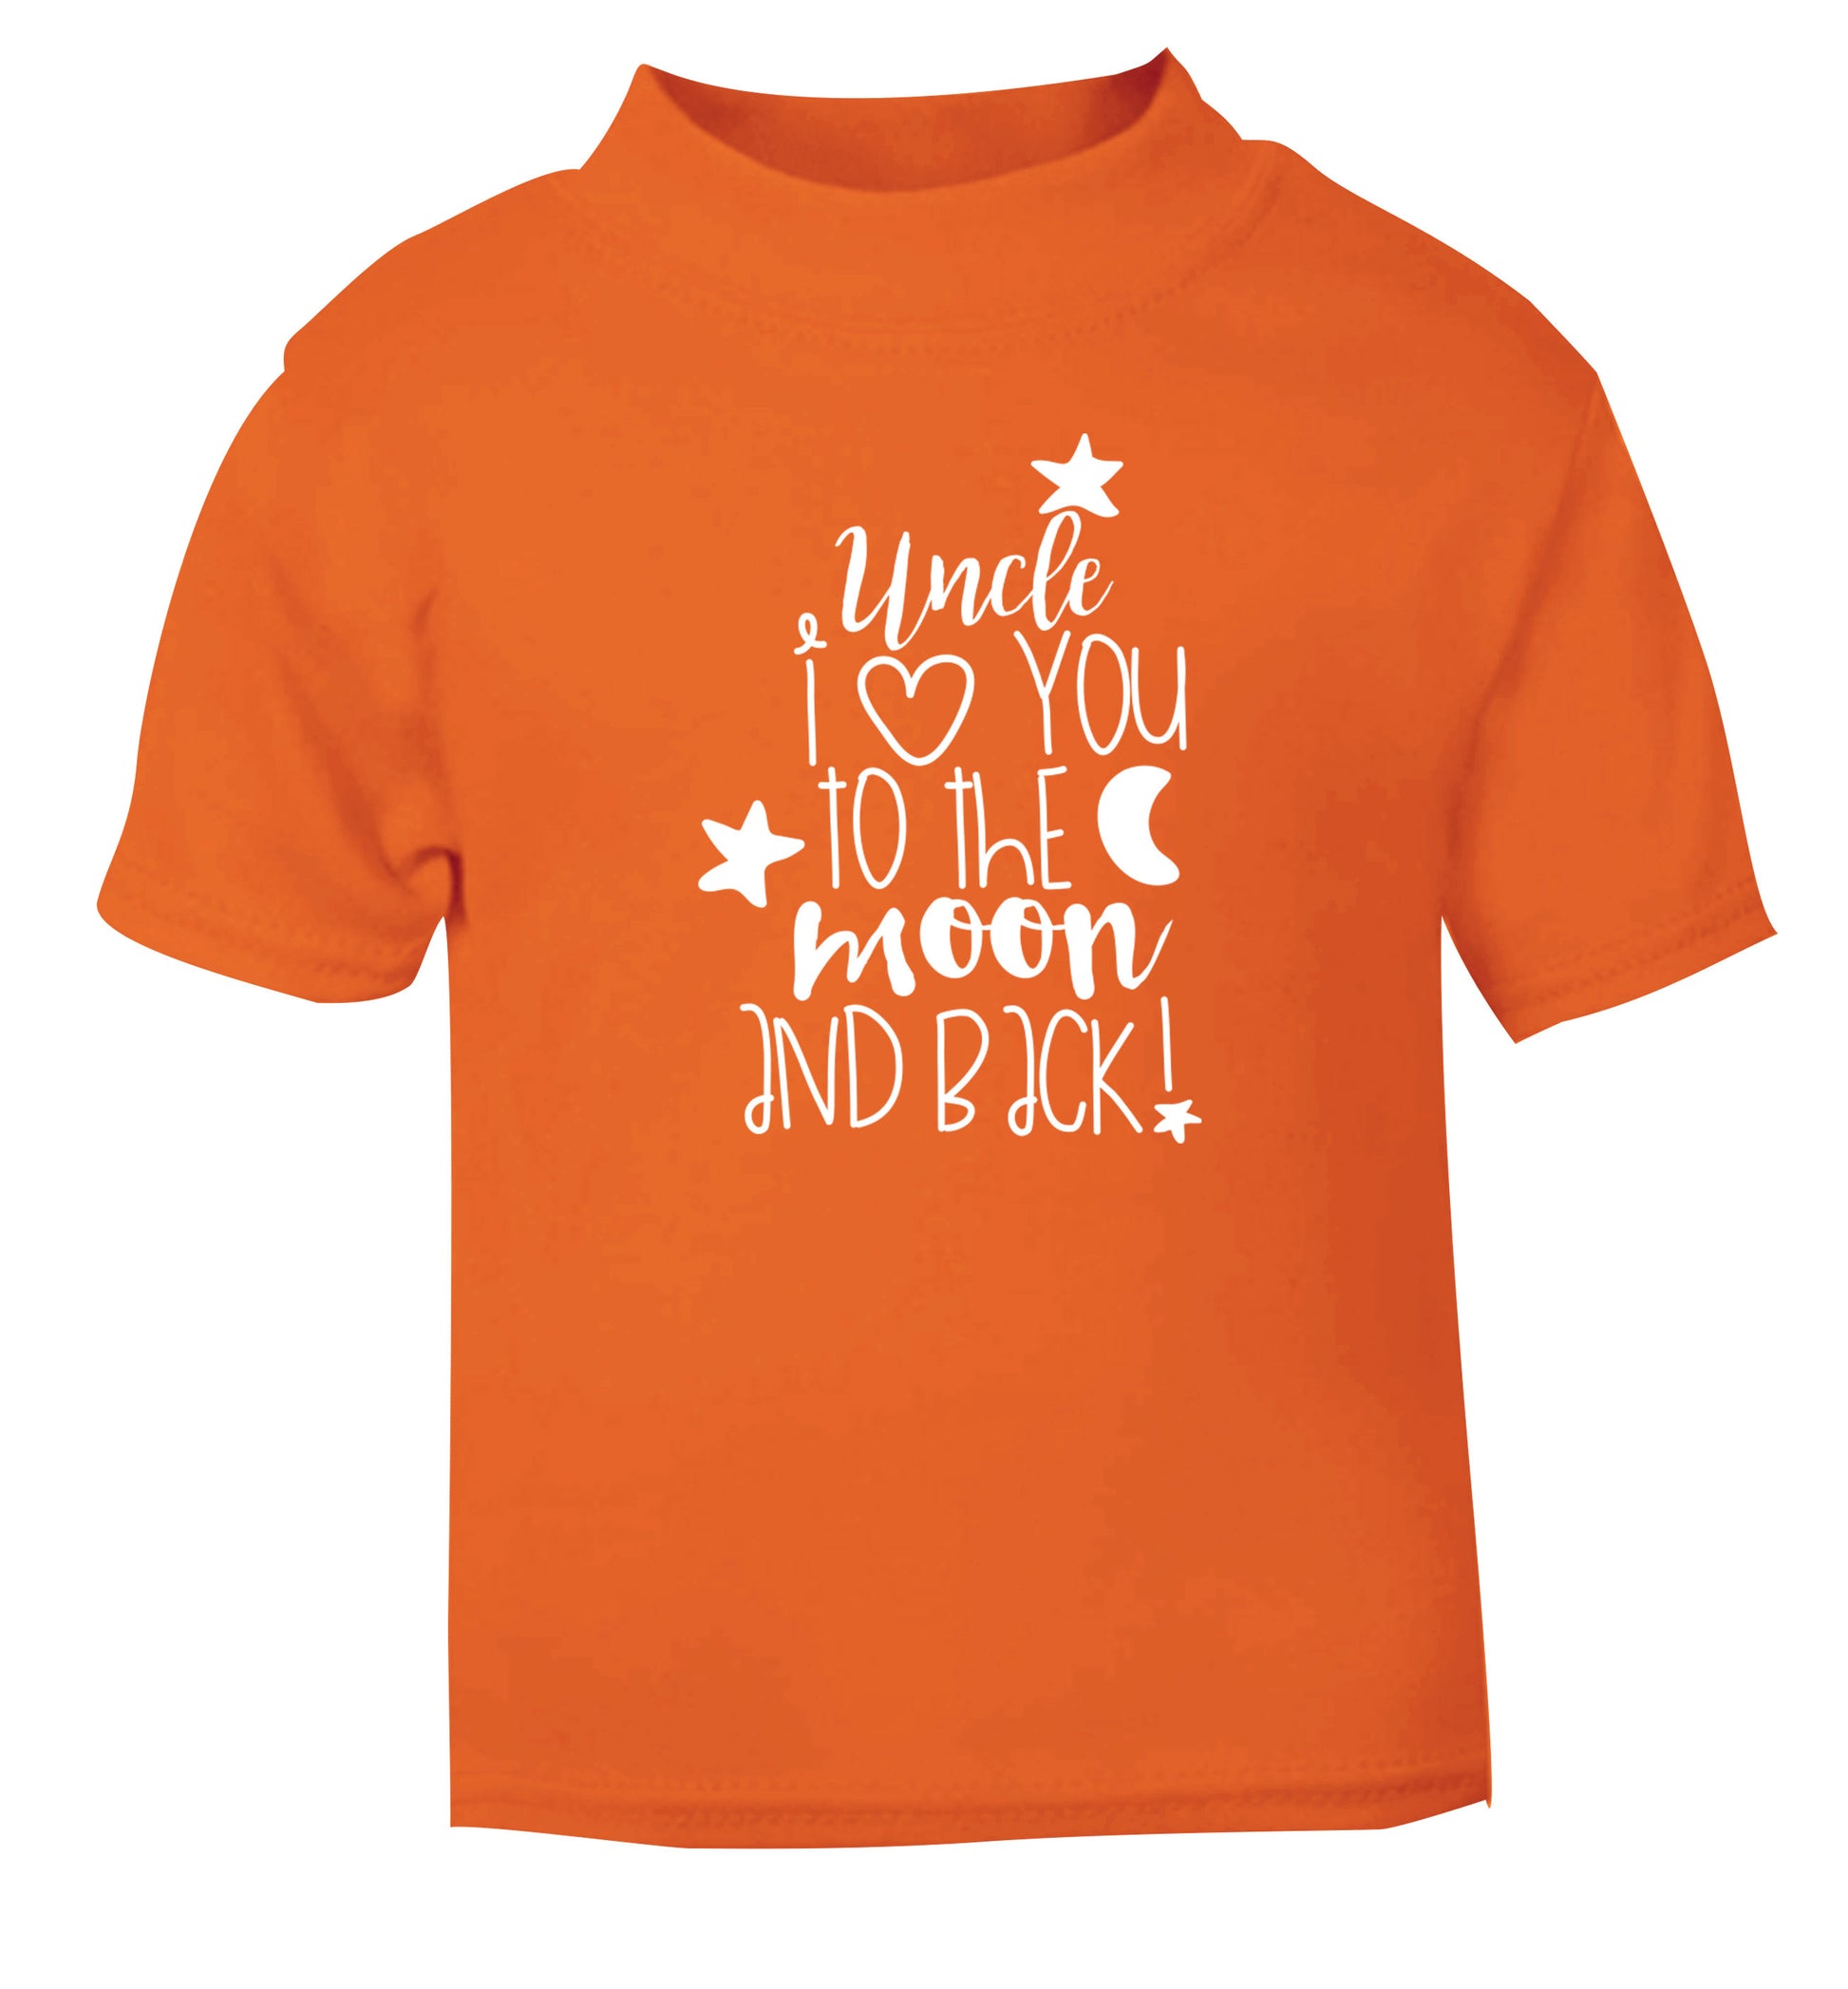 Uncle I love you to the moon and back orange Baby Toddler Tshirt 2 Years